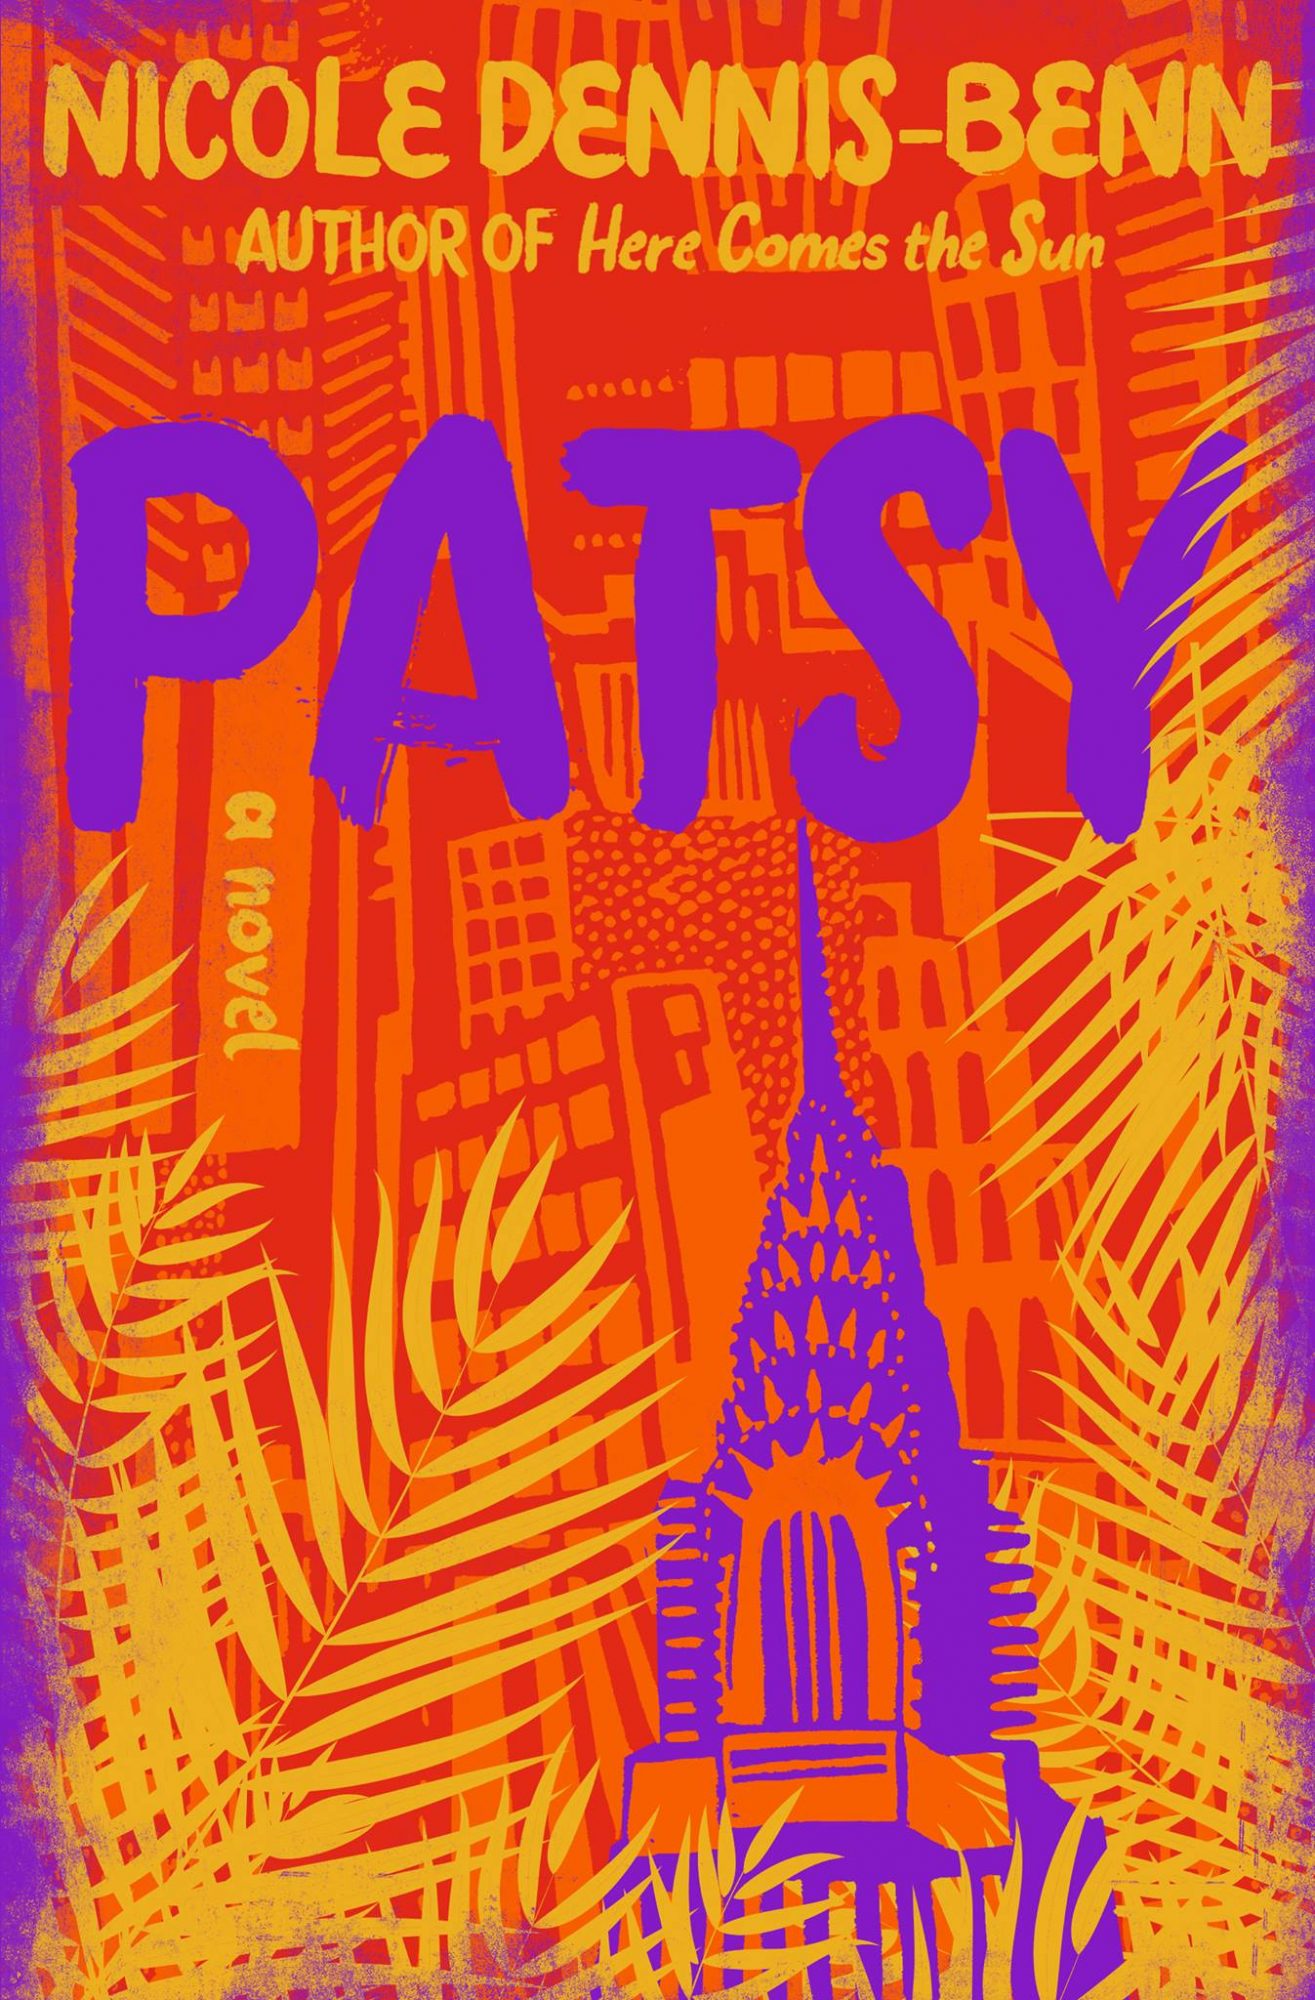 Patsy book cover